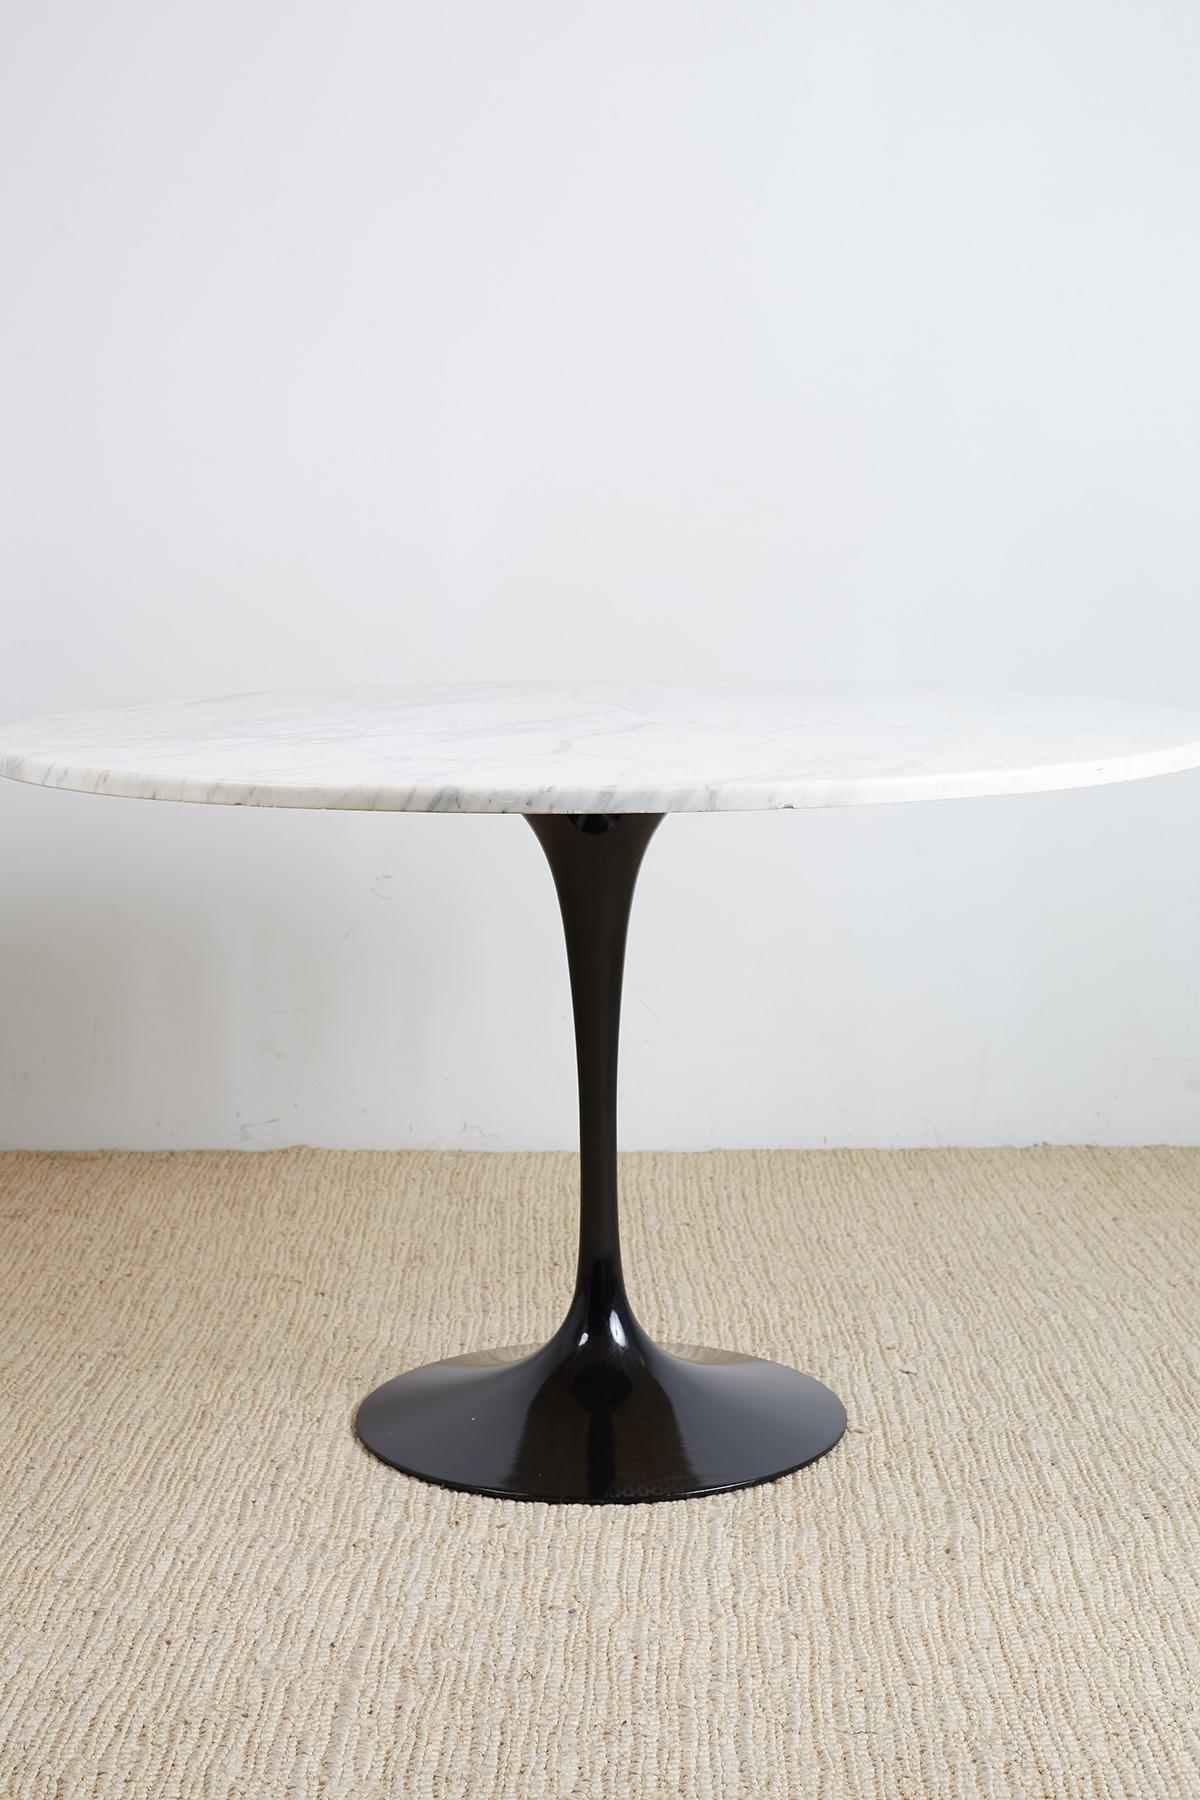 Dramatic Carrara white marble top tulip table featuring a contrasting black metal base. Designed by Eero Saarinen for Knoll. Signed, stamped, and dated on base of table on top and bottom. Iconic lacquered aluminum base supports a 48 inch diameter